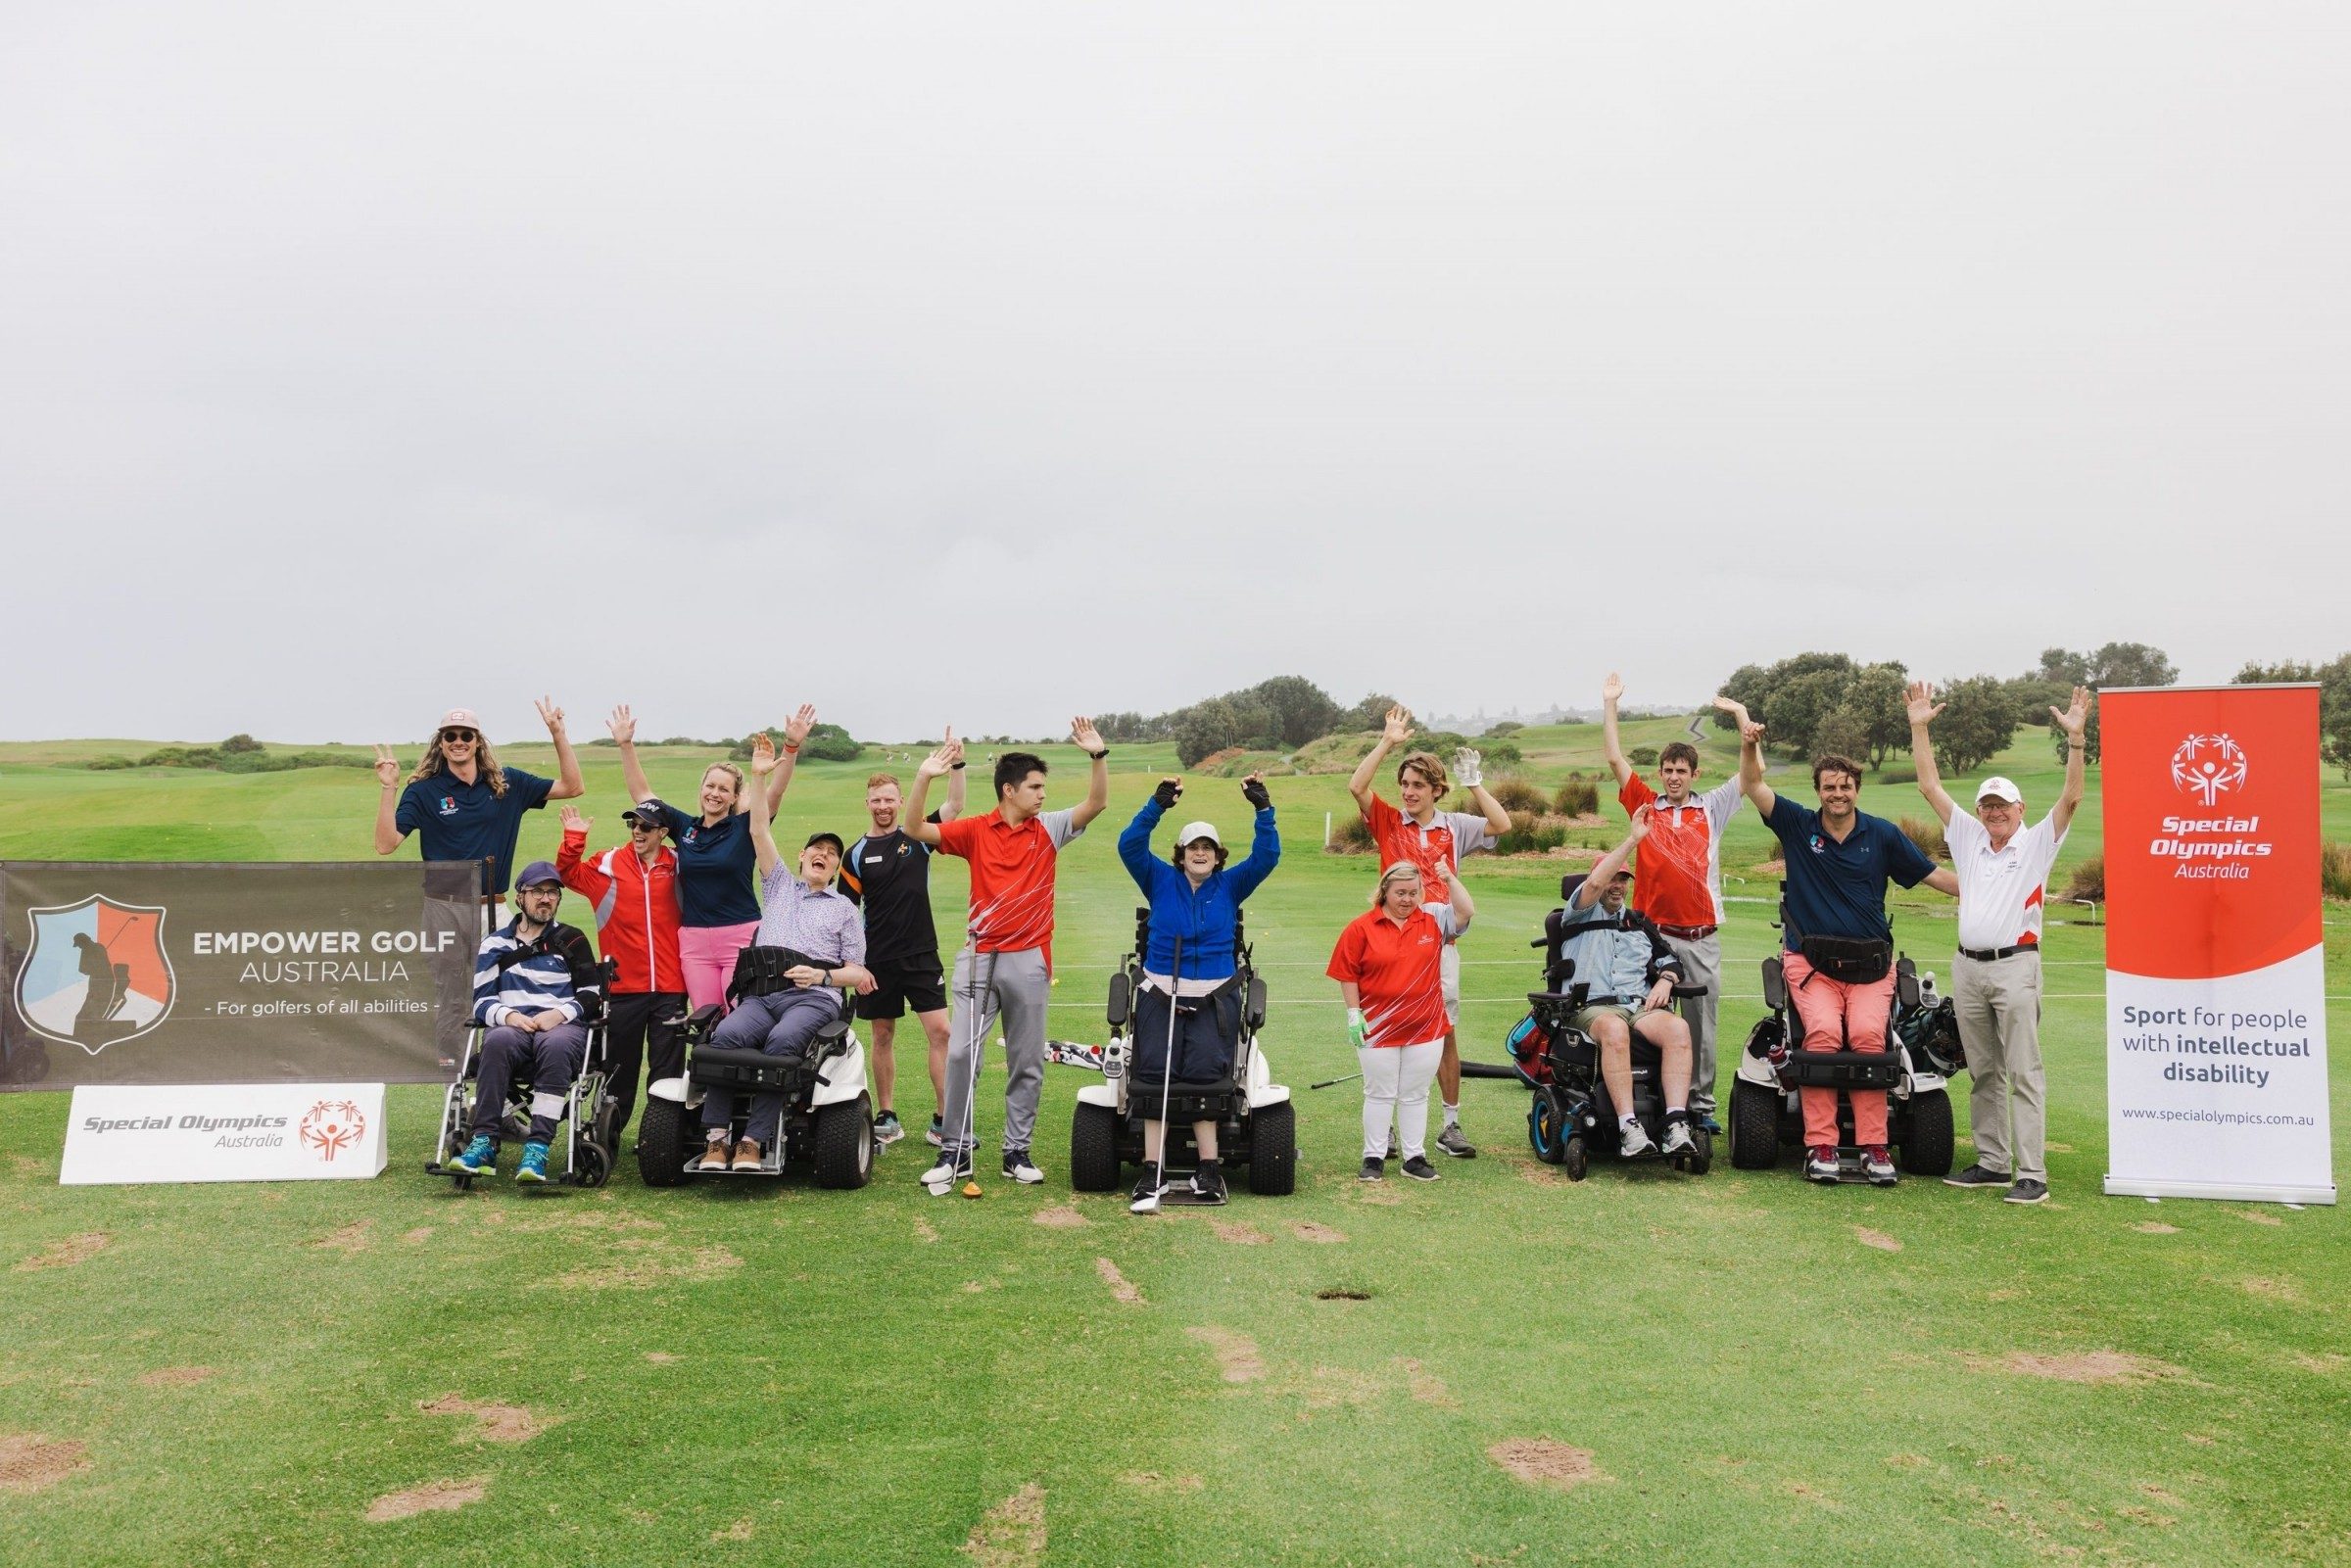 EMPOWER GOLF AFFILIATES WITH SPECIAL OLYMPICS AUSTRALIA TO CHANGE PEOPLE’S LIVES THROUGH GOLF